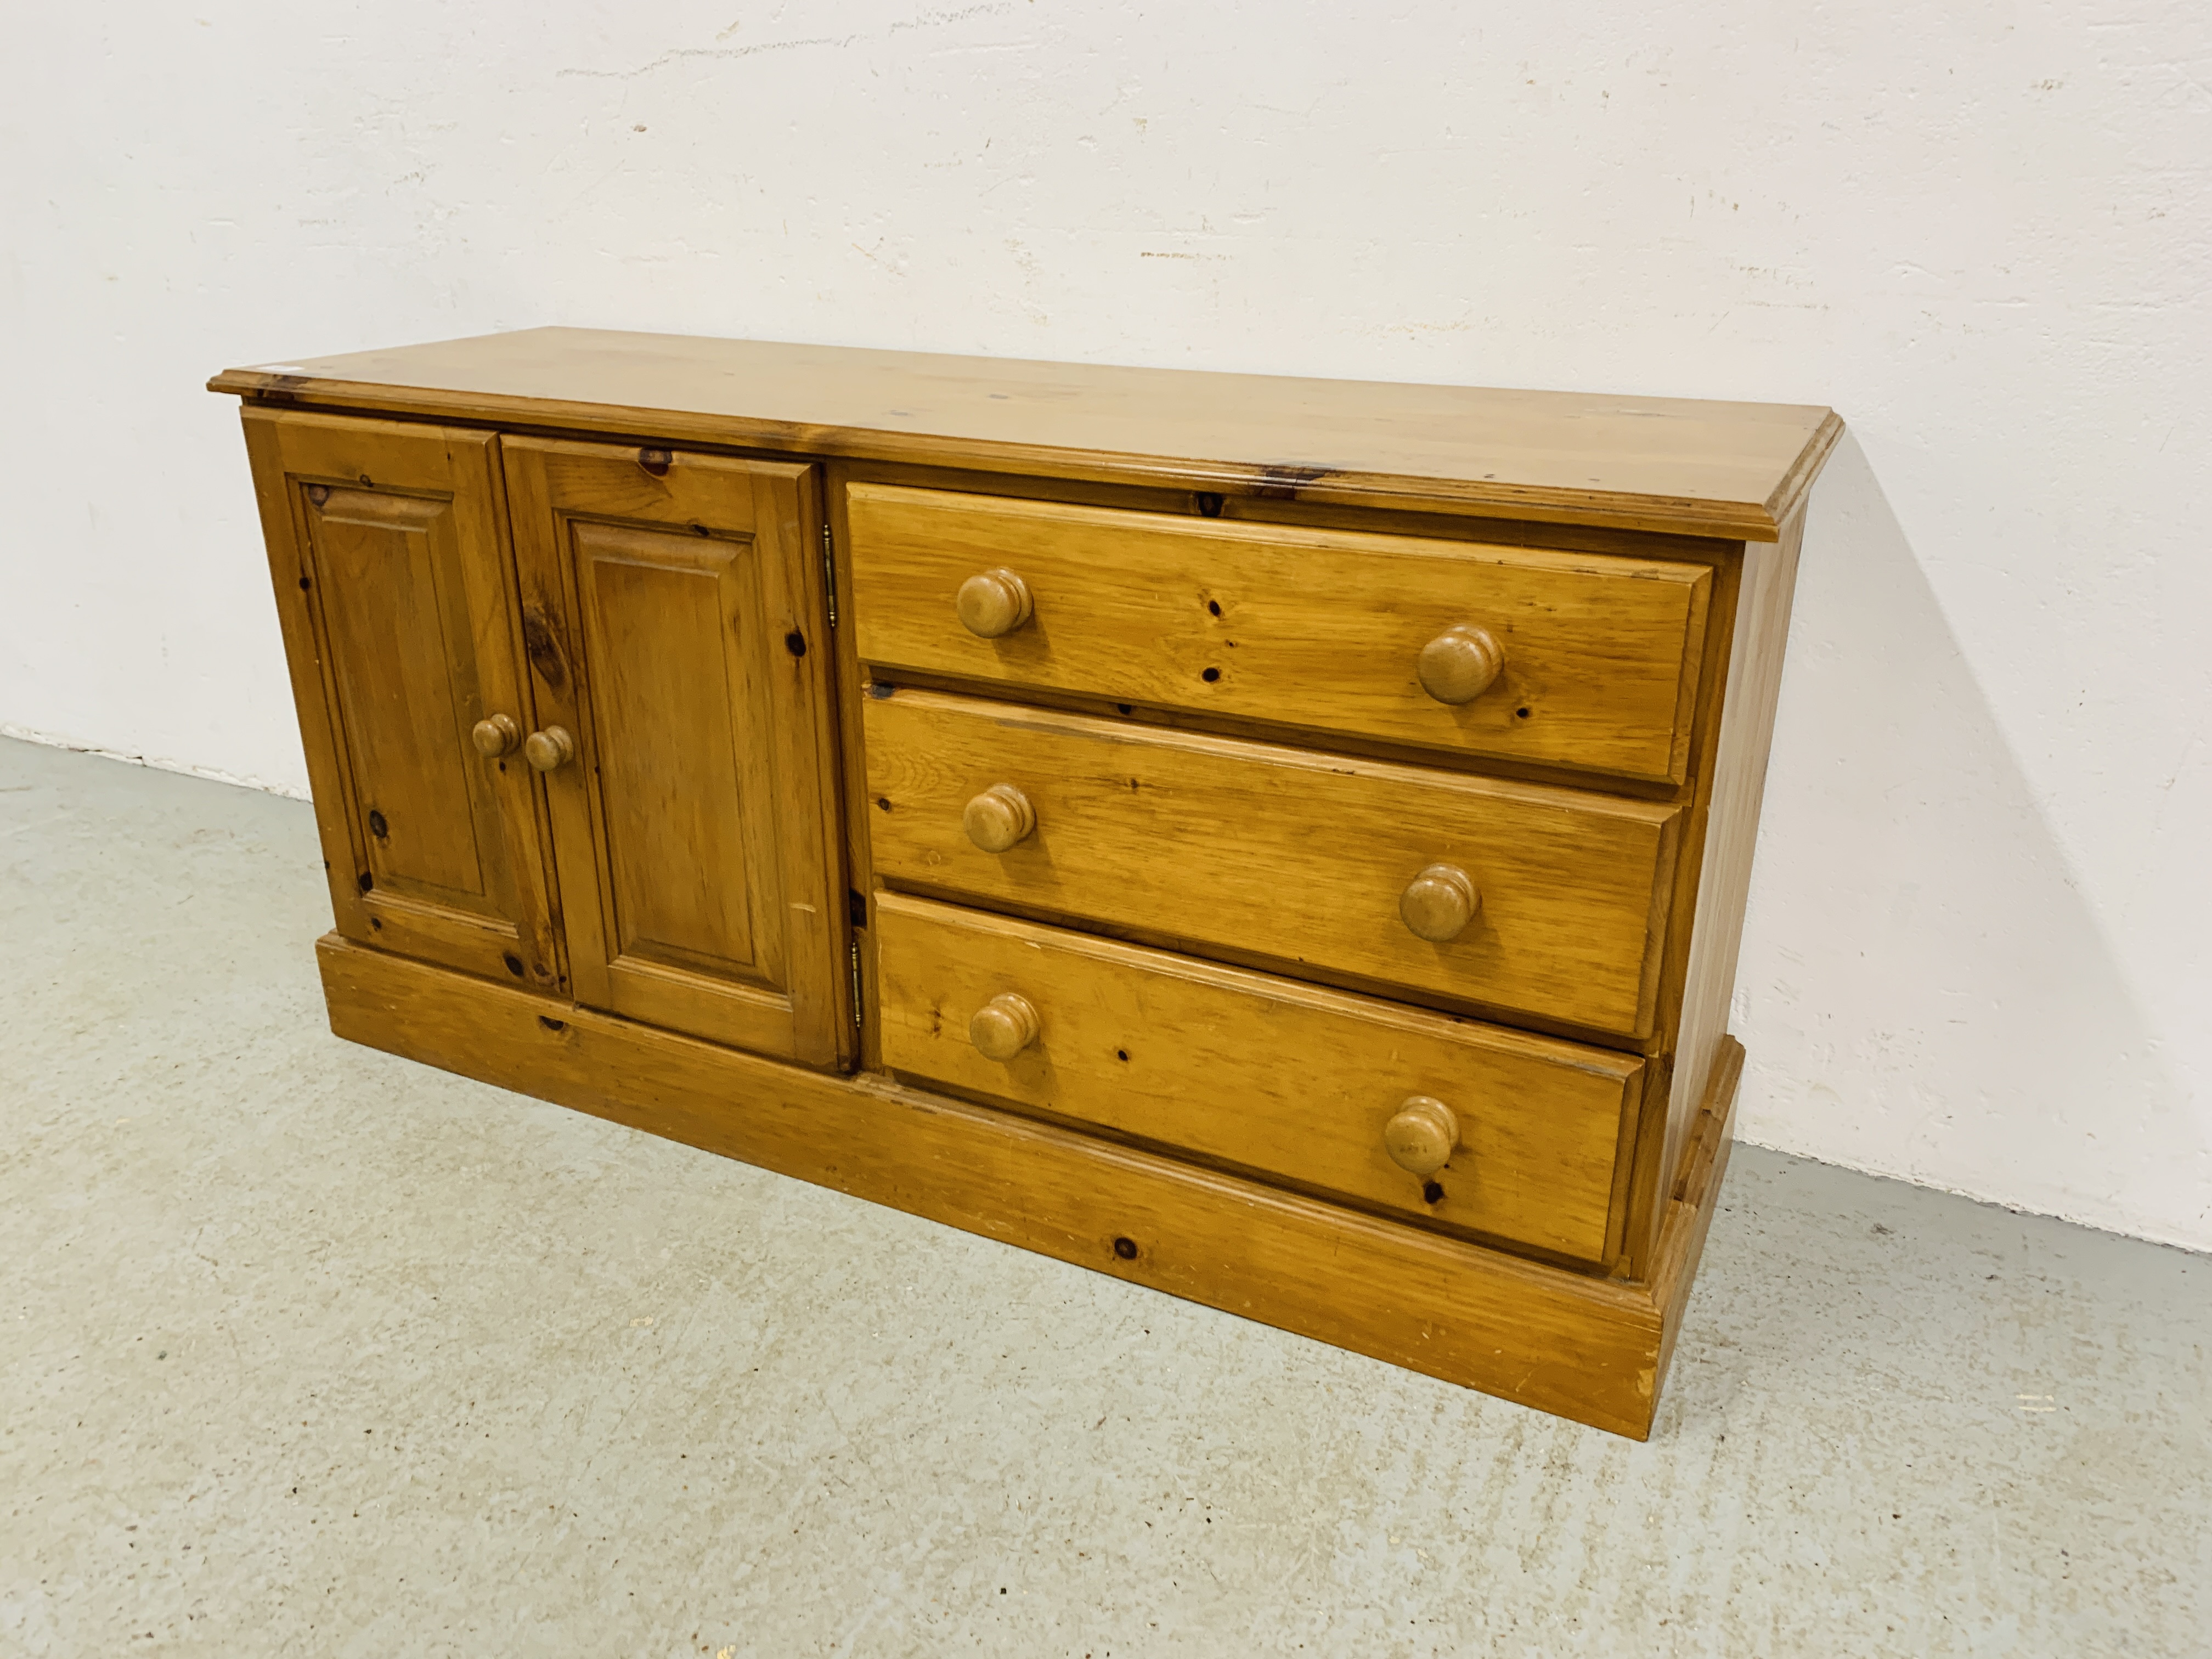 A SOLID HONEY PINE THREE DRAWER DRESSER BASE WITH CABINET TO ONE END - W 130CM. D 41CM. H 66CM. - Image 3 of 9